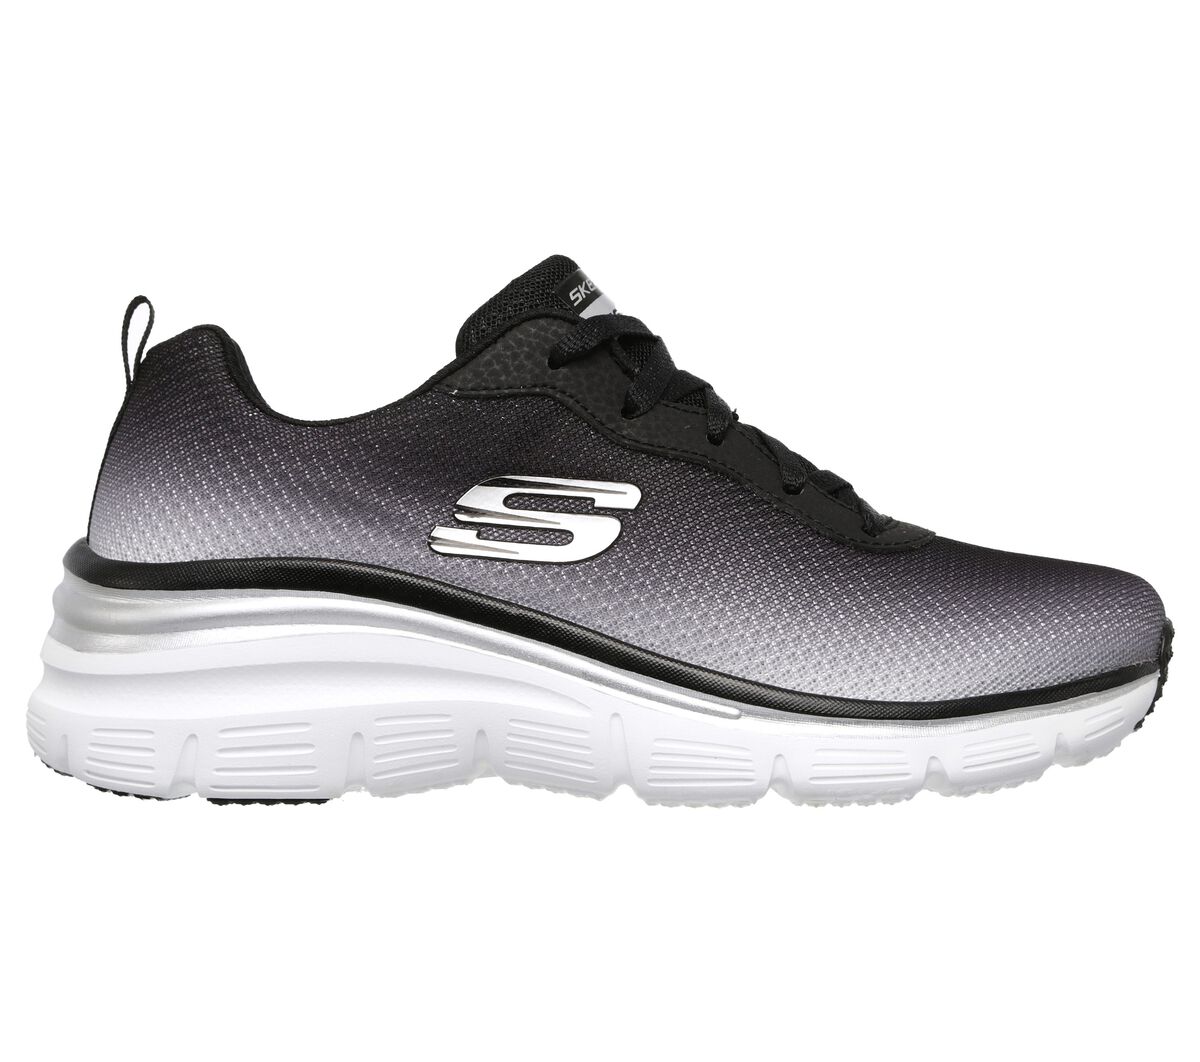 Skechers Fashion Fit Build up Womens Sneakers Black/White 6